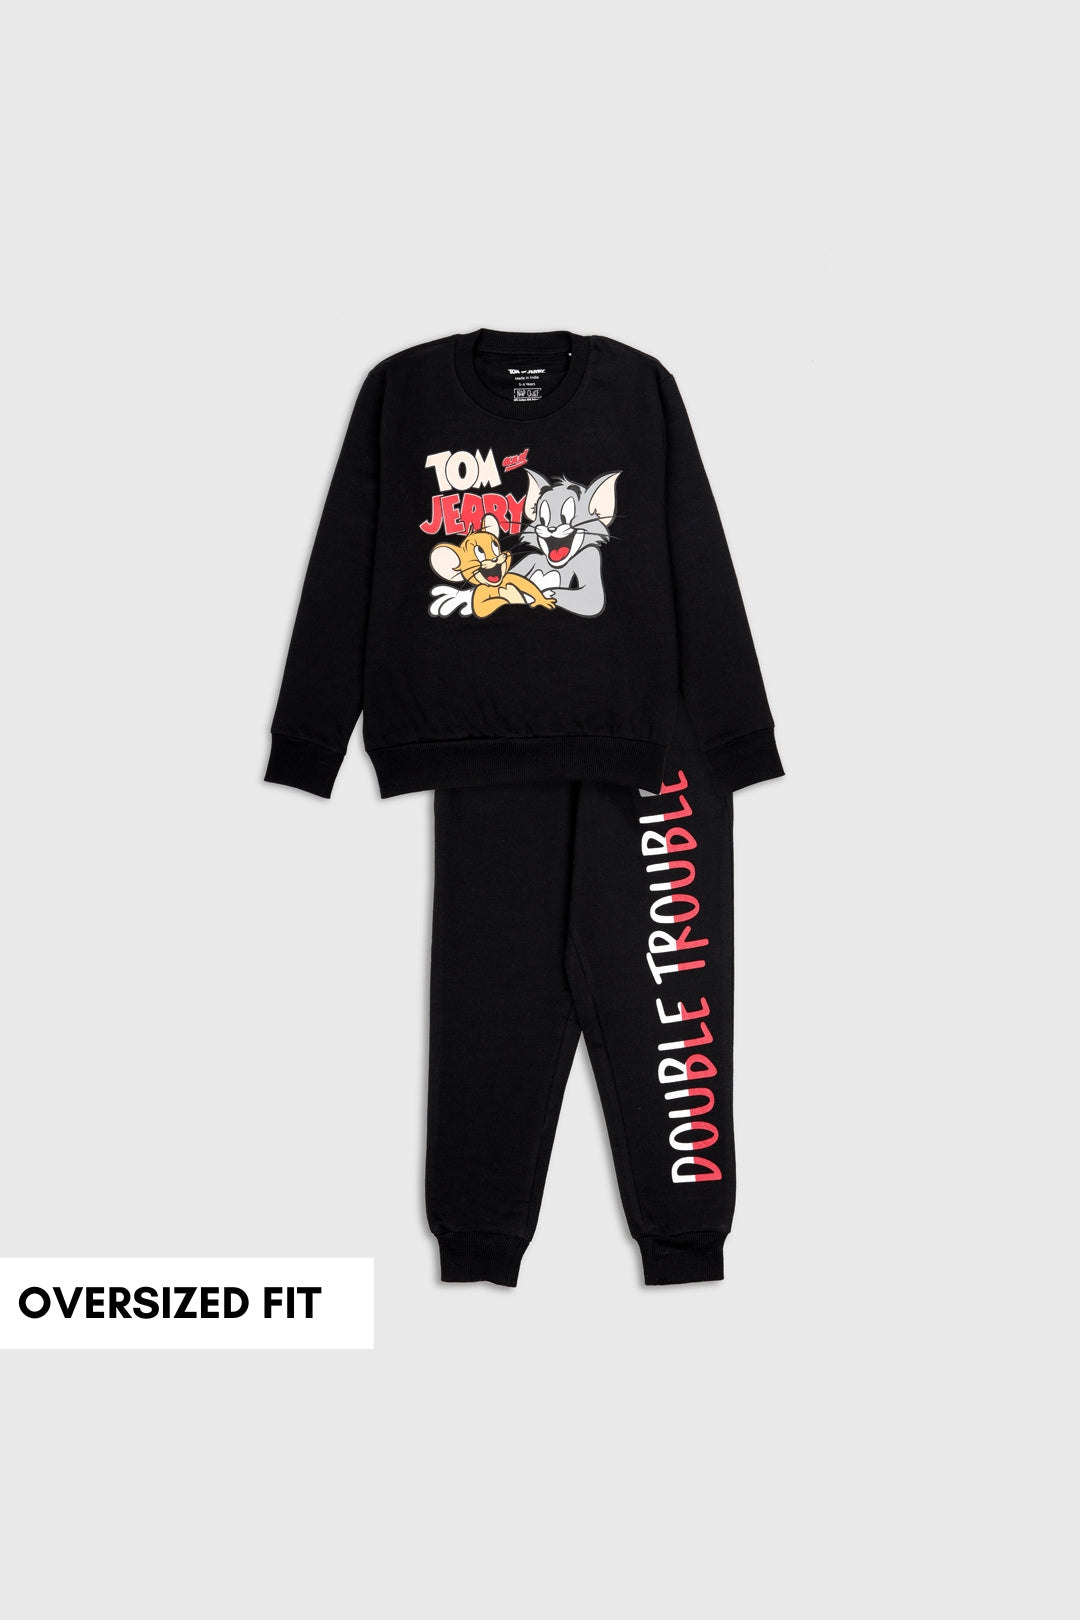 Tom & Jerry Double Trouble Co-Ord set